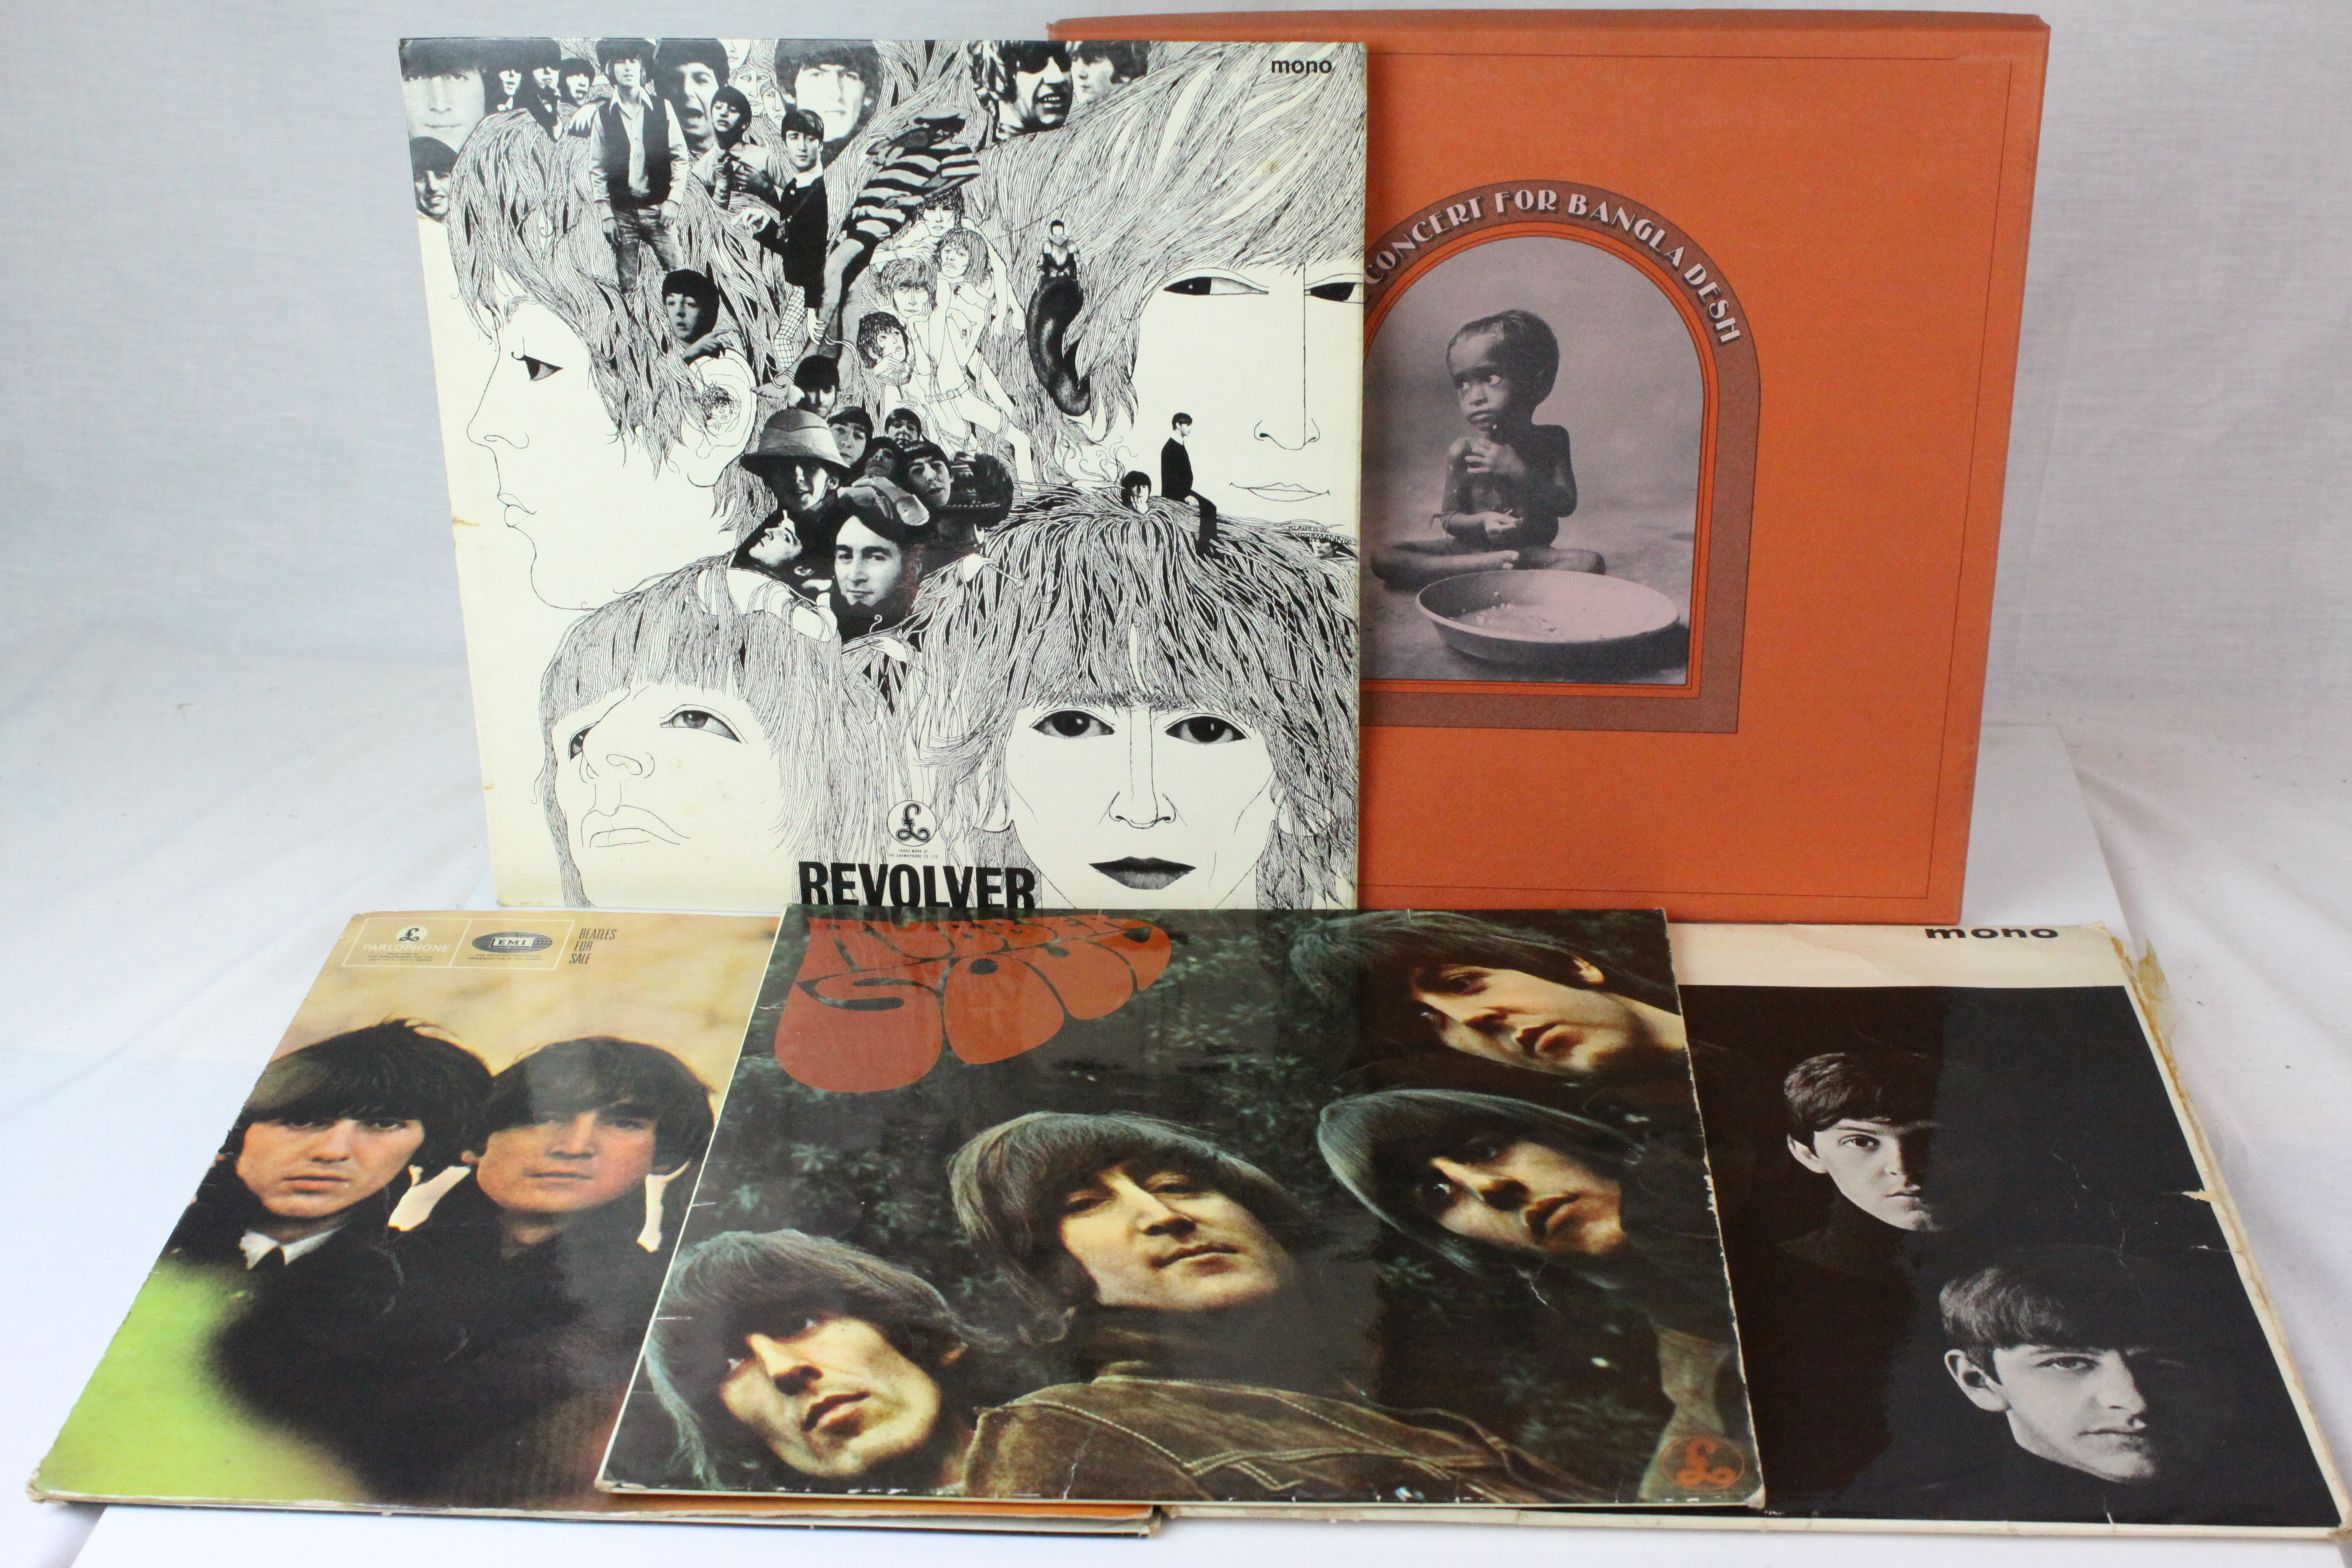 Vinyl - Four The Beatles LPs to include For Sale PMC1240 mono, Revolver PMC7009 mono, With The